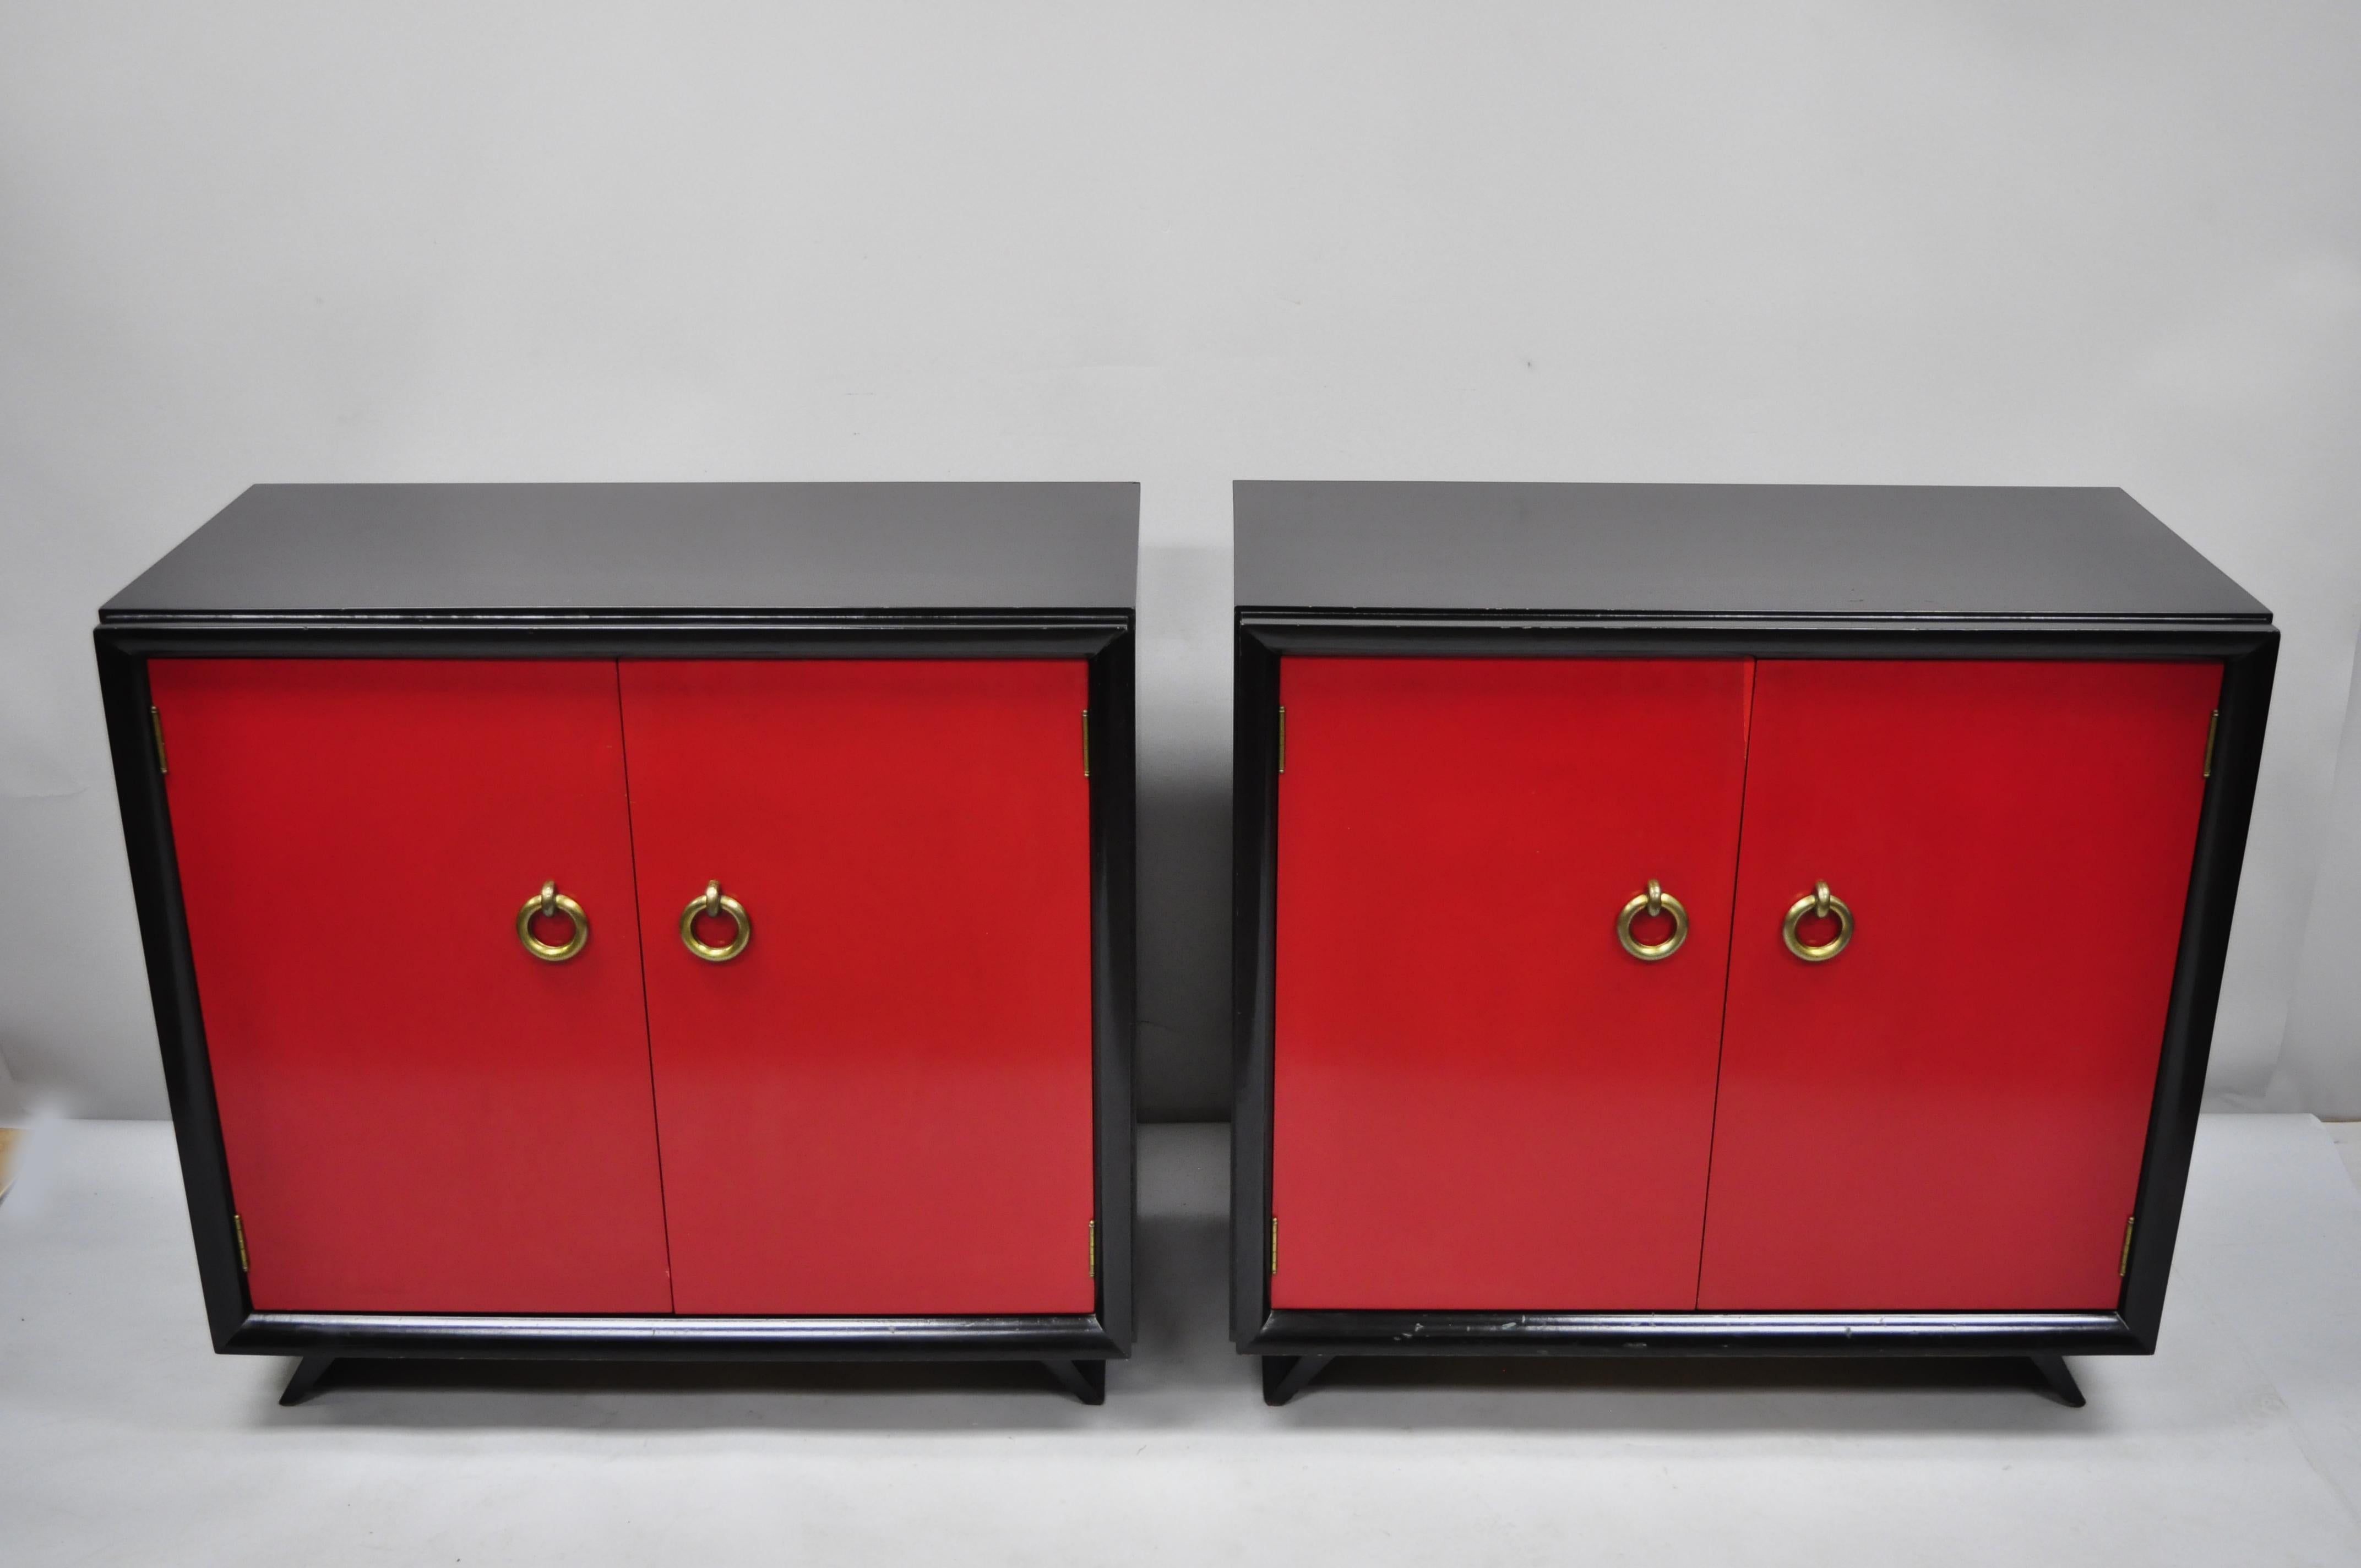 Pair of Red and Black Art Deco Mid-Century Modern Cabinet Commodes by Harjer 6